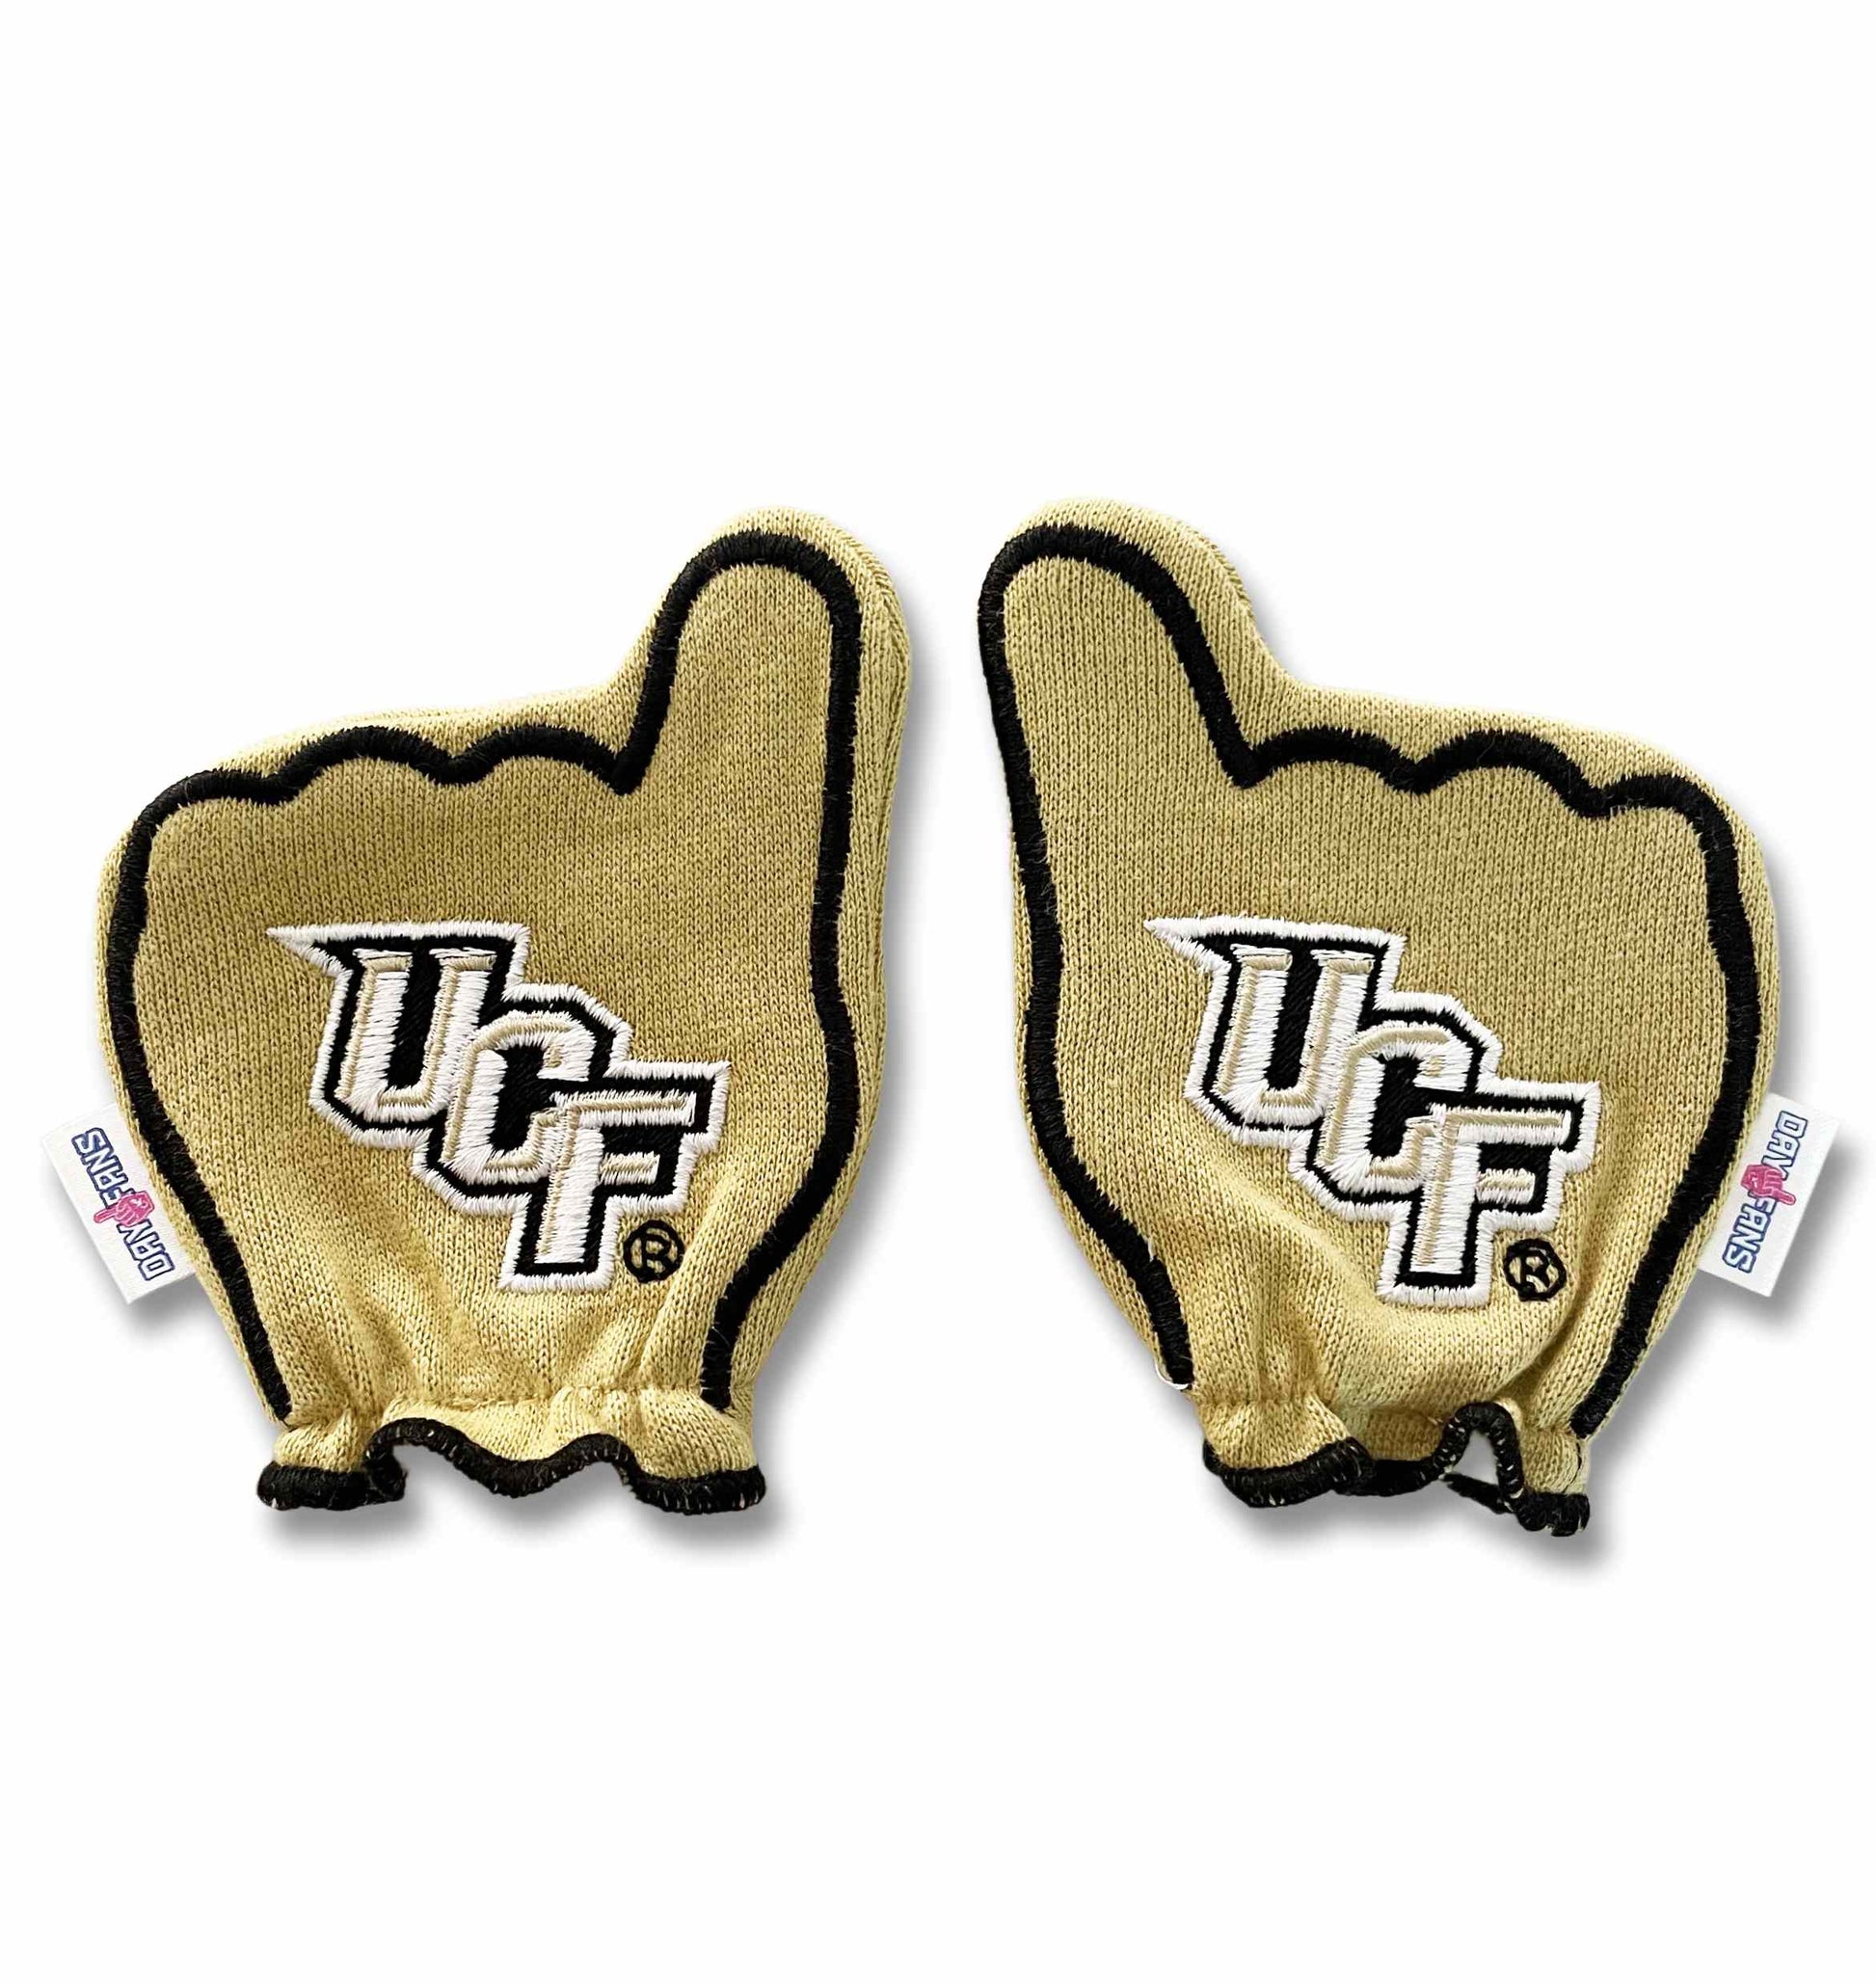 UCF Charge On FanMitts Baby Mittens Gold Back Pair